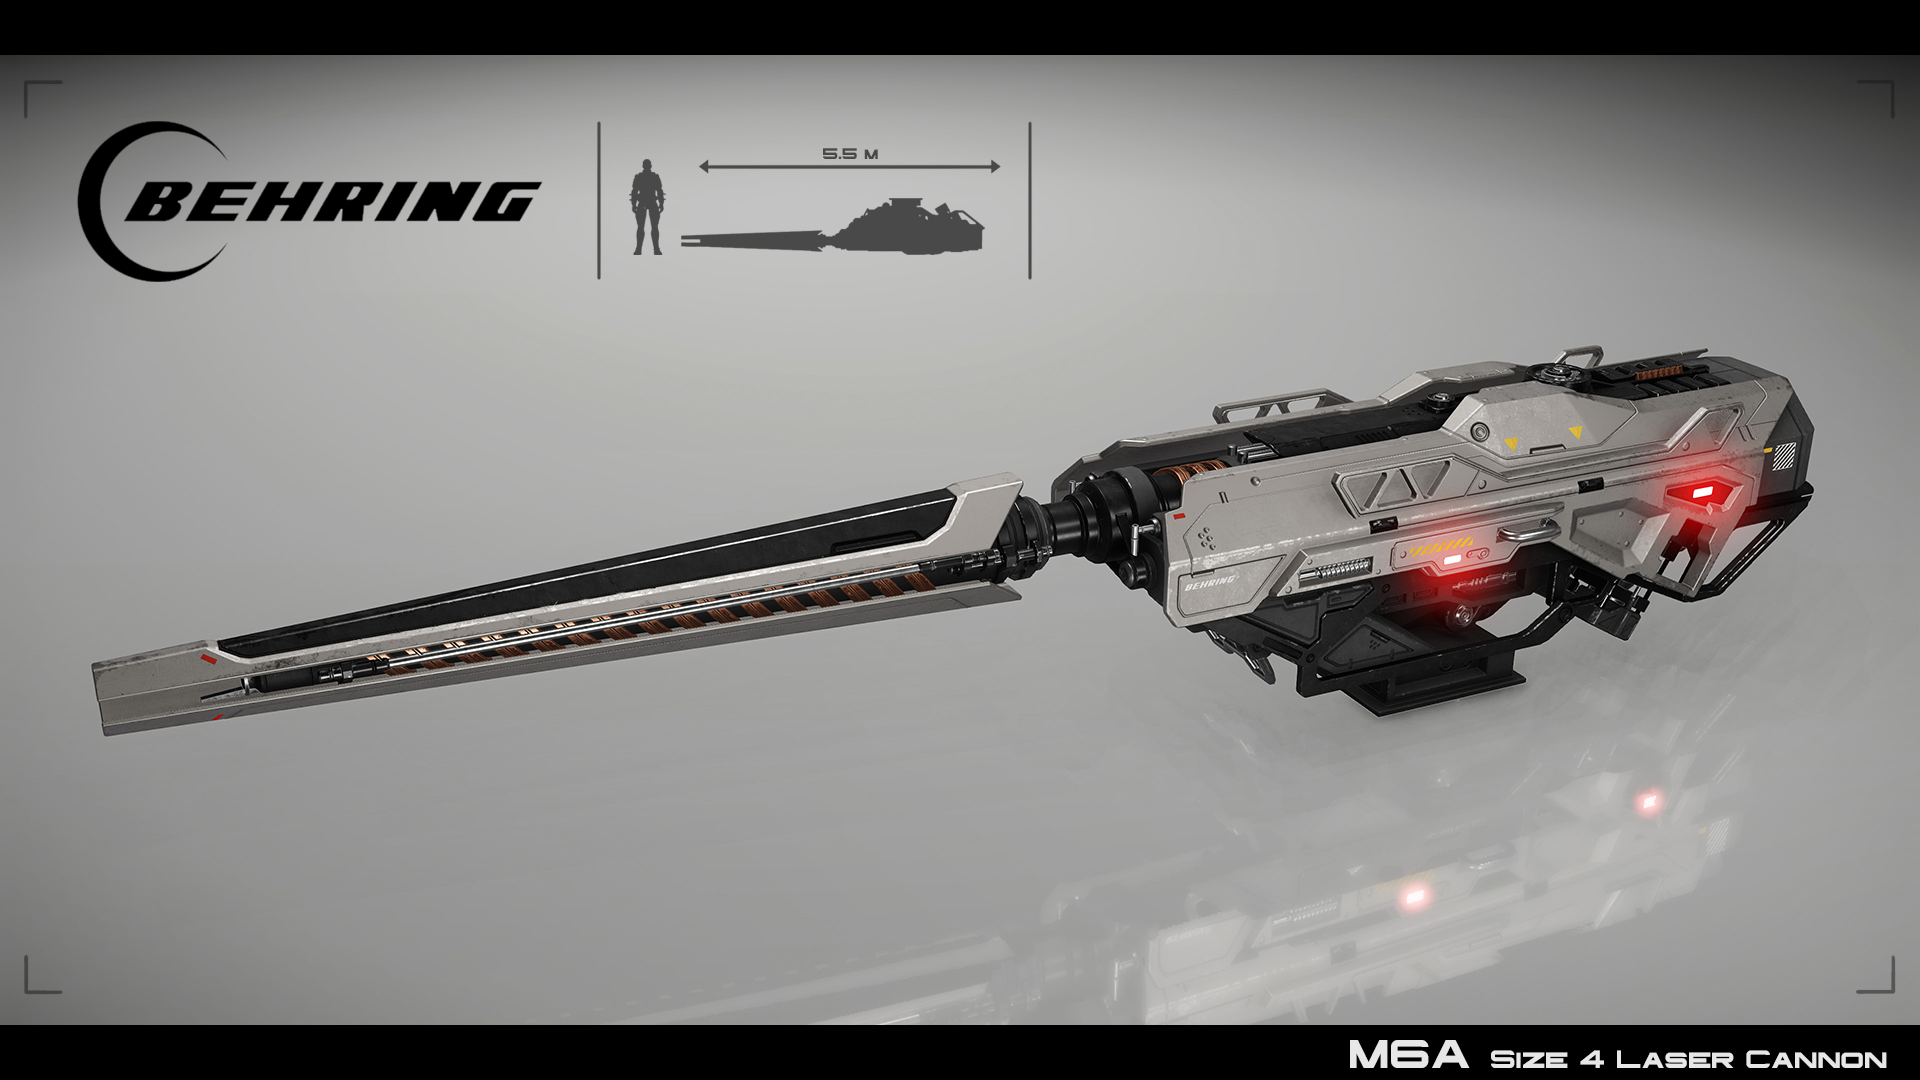 BEHRING M7A LASER CANNON. Star citizen .fr